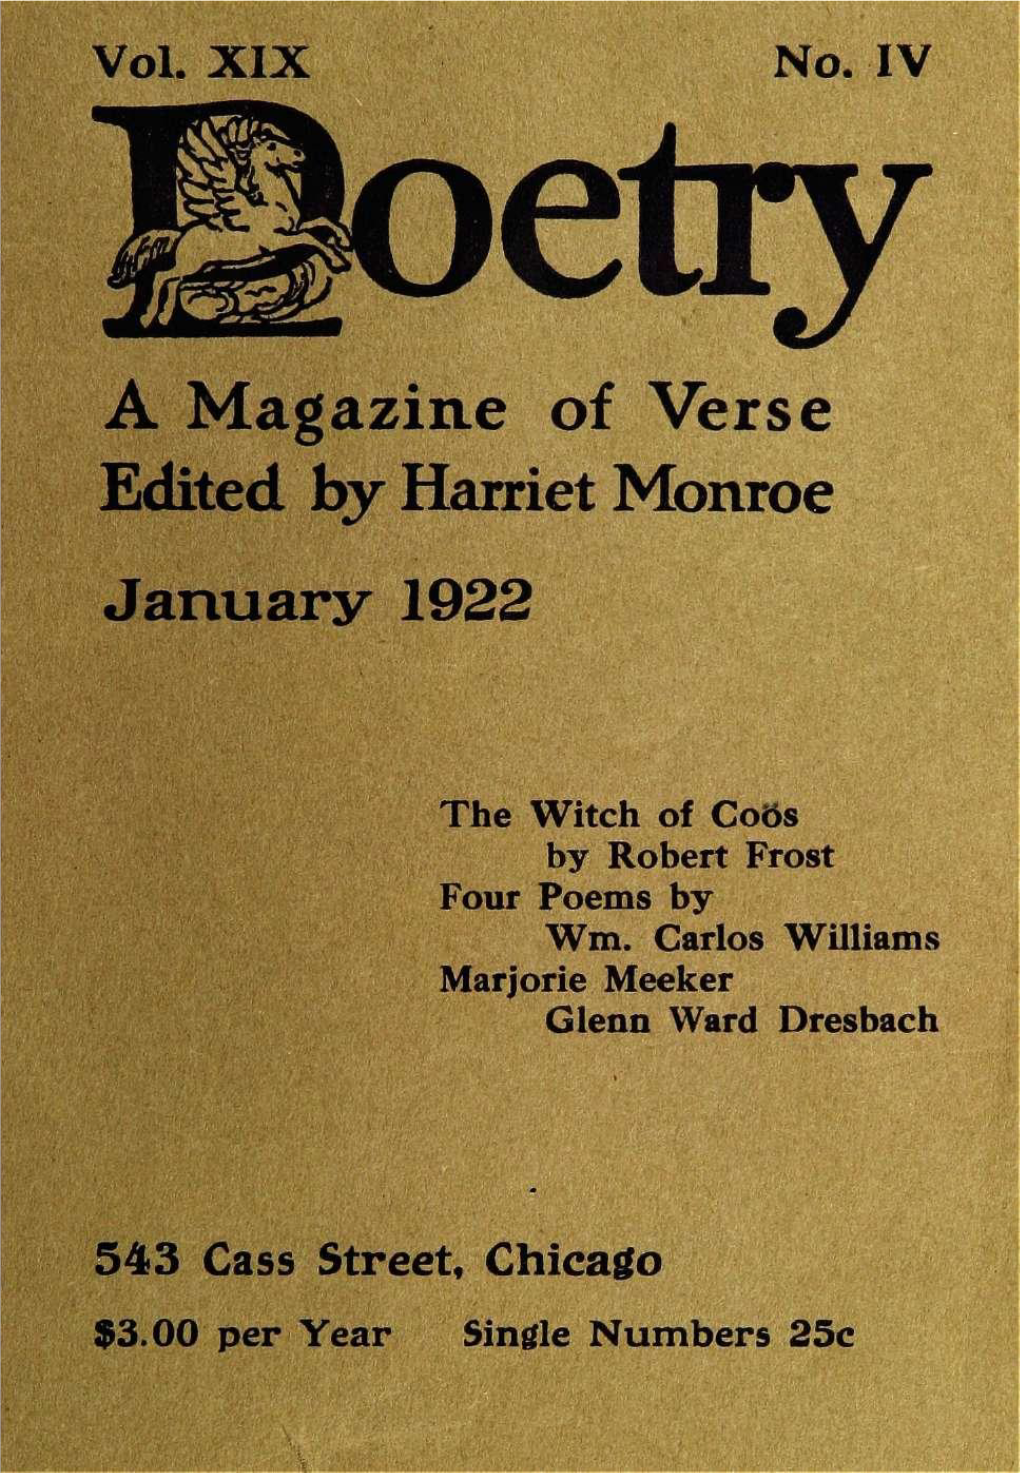 A Magazine of Verse Edited by Harriet Monroe January 1922